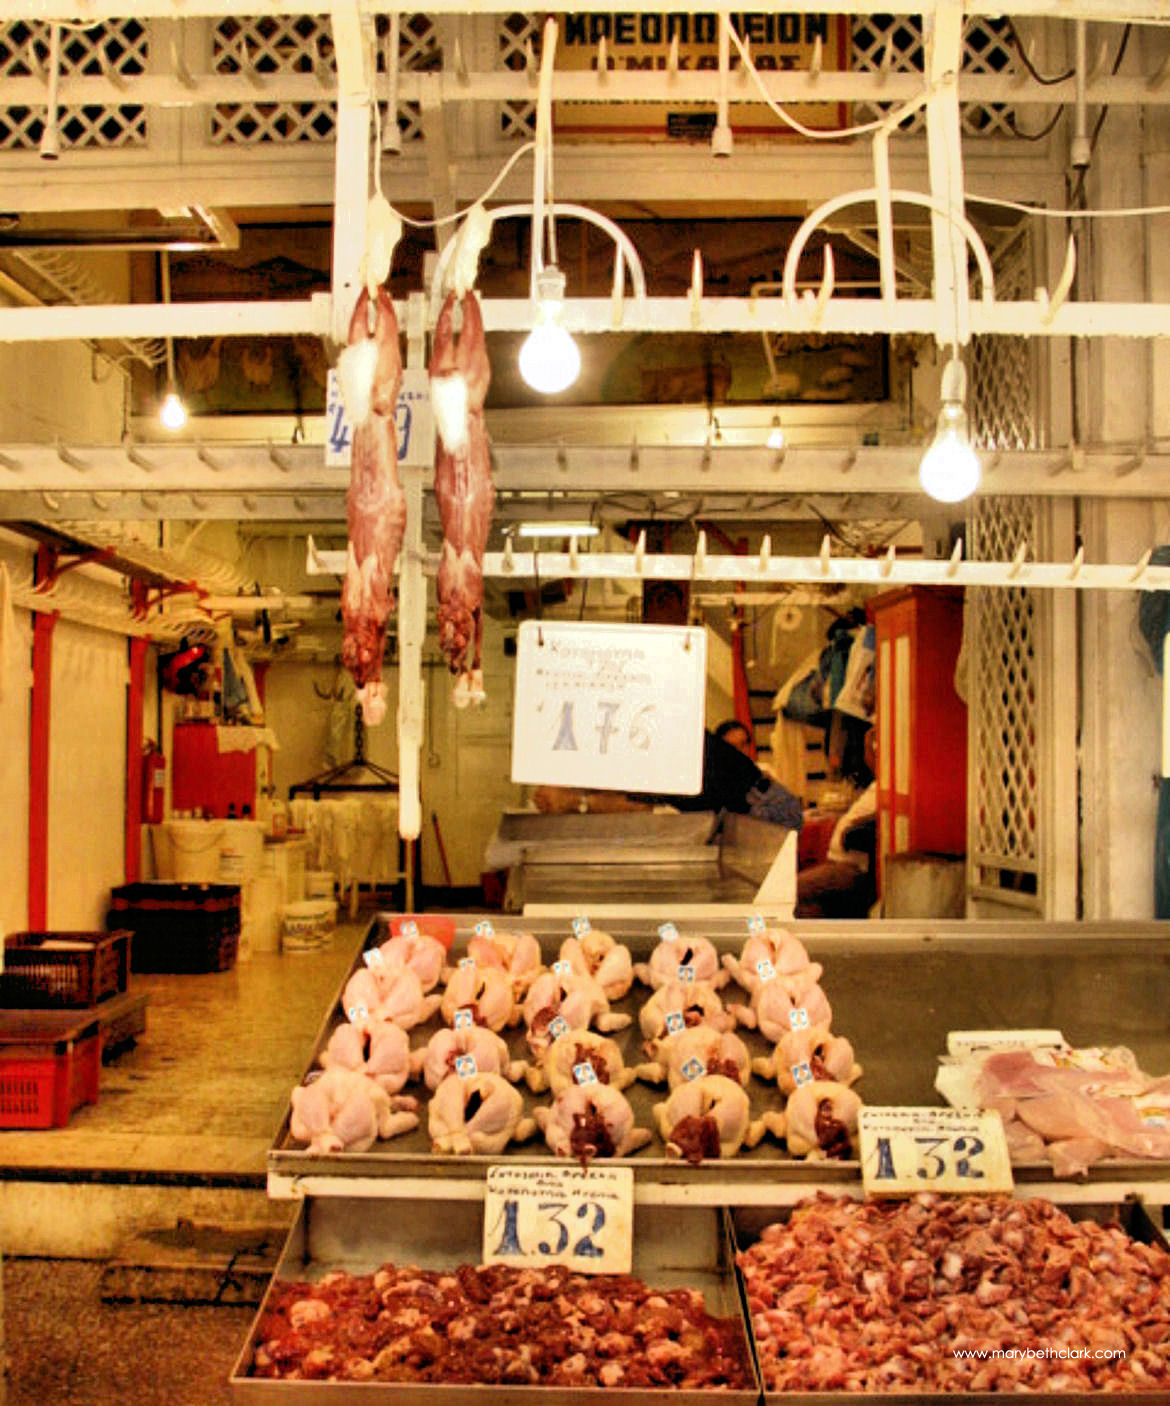 Athens Central Market: Chickens and Rabbits - 1170 pixels - 2